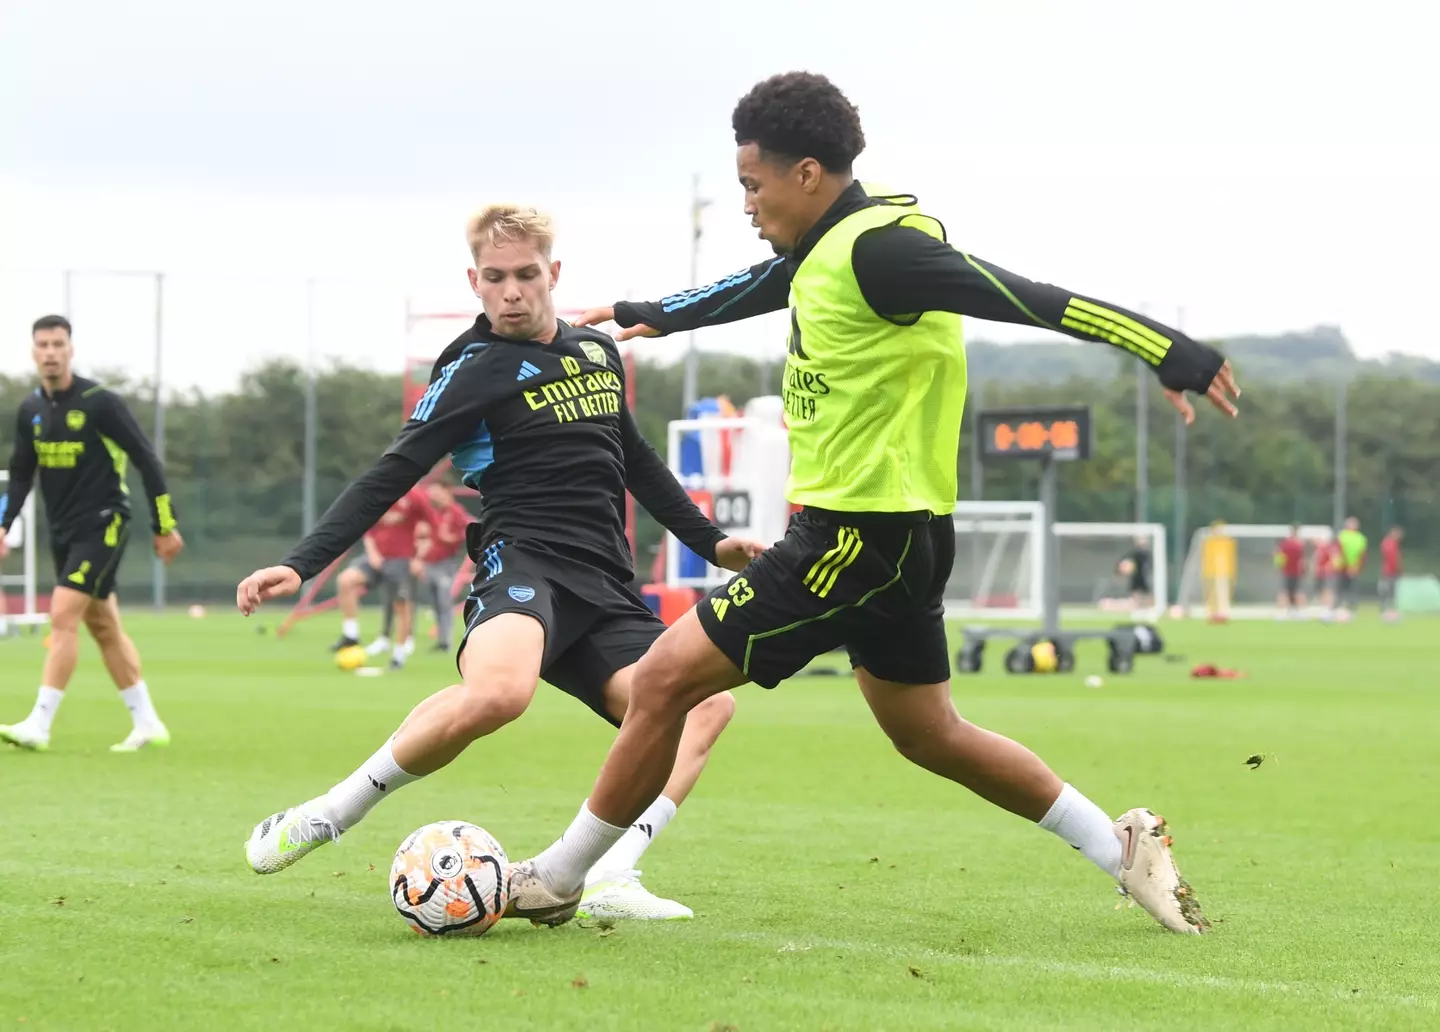 Nwaneri pictured in training against Emile Smith Rowe. (